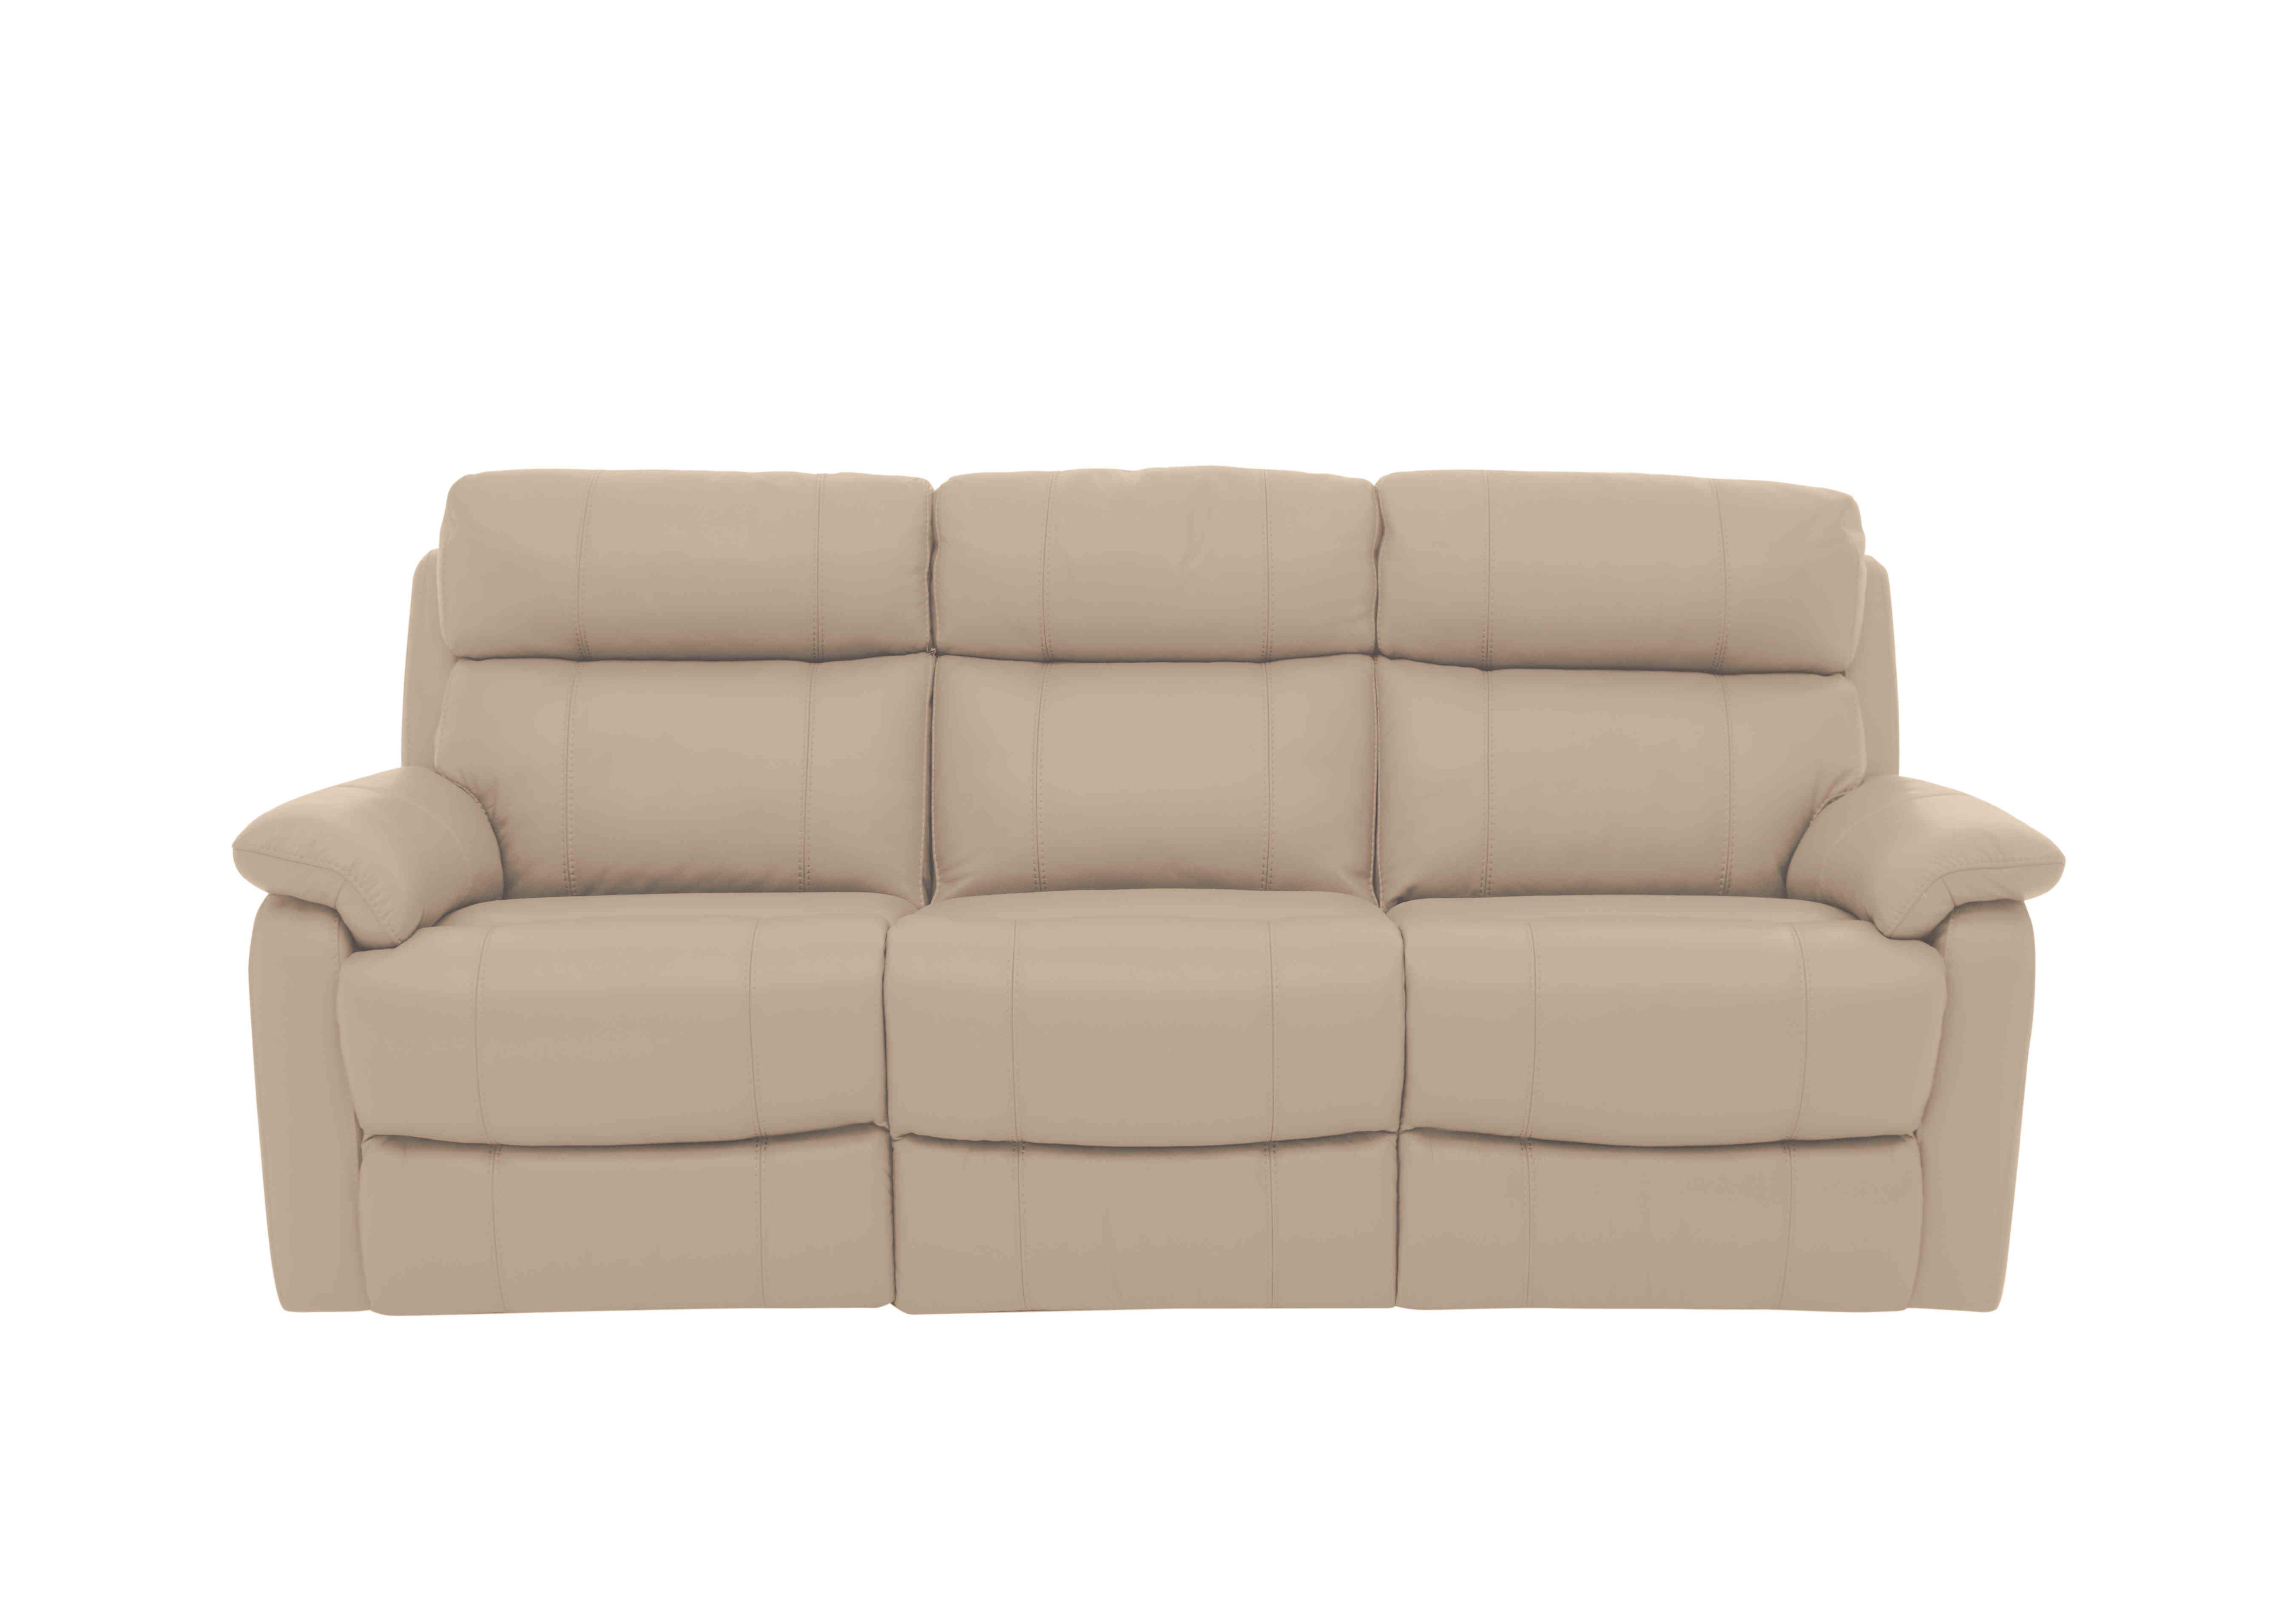 Relax Station Komodo 3 Seater Leather Sofa with Power Headrests and Cup Holders in Bv-039c Pebble on Furniture Village